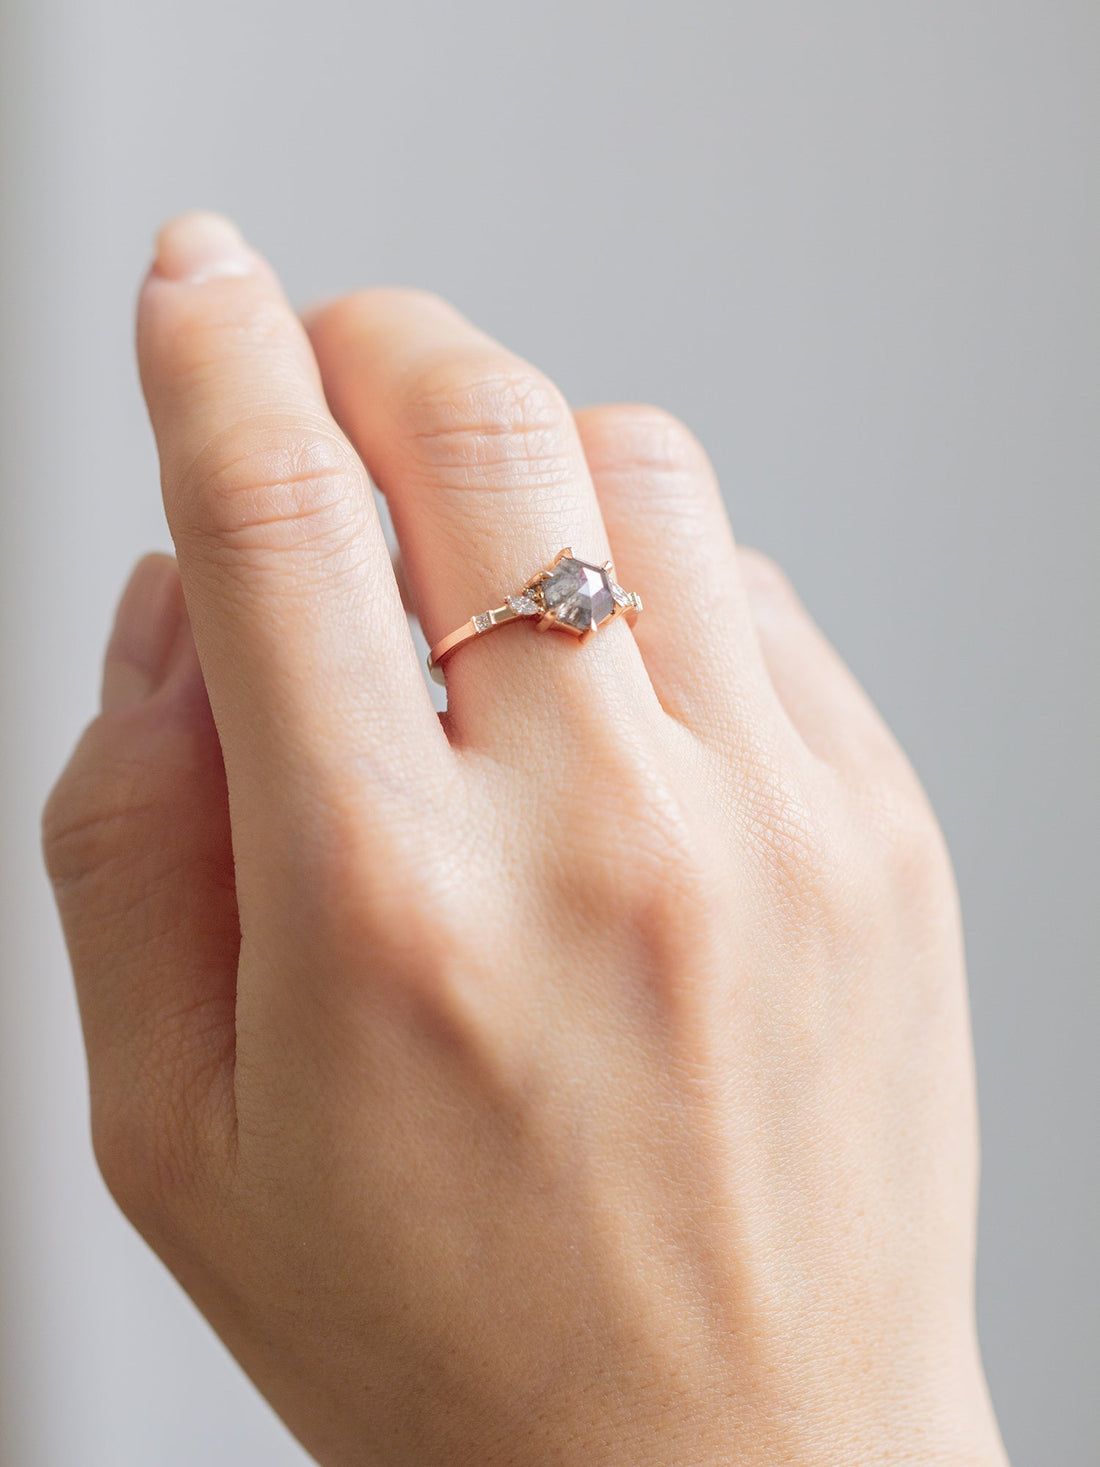 Unique art deco styled hexagon shaped salt and pepper diamond engagement ring in 14k rose gold with smaller marquise, round, and princess cut diamonds on model&